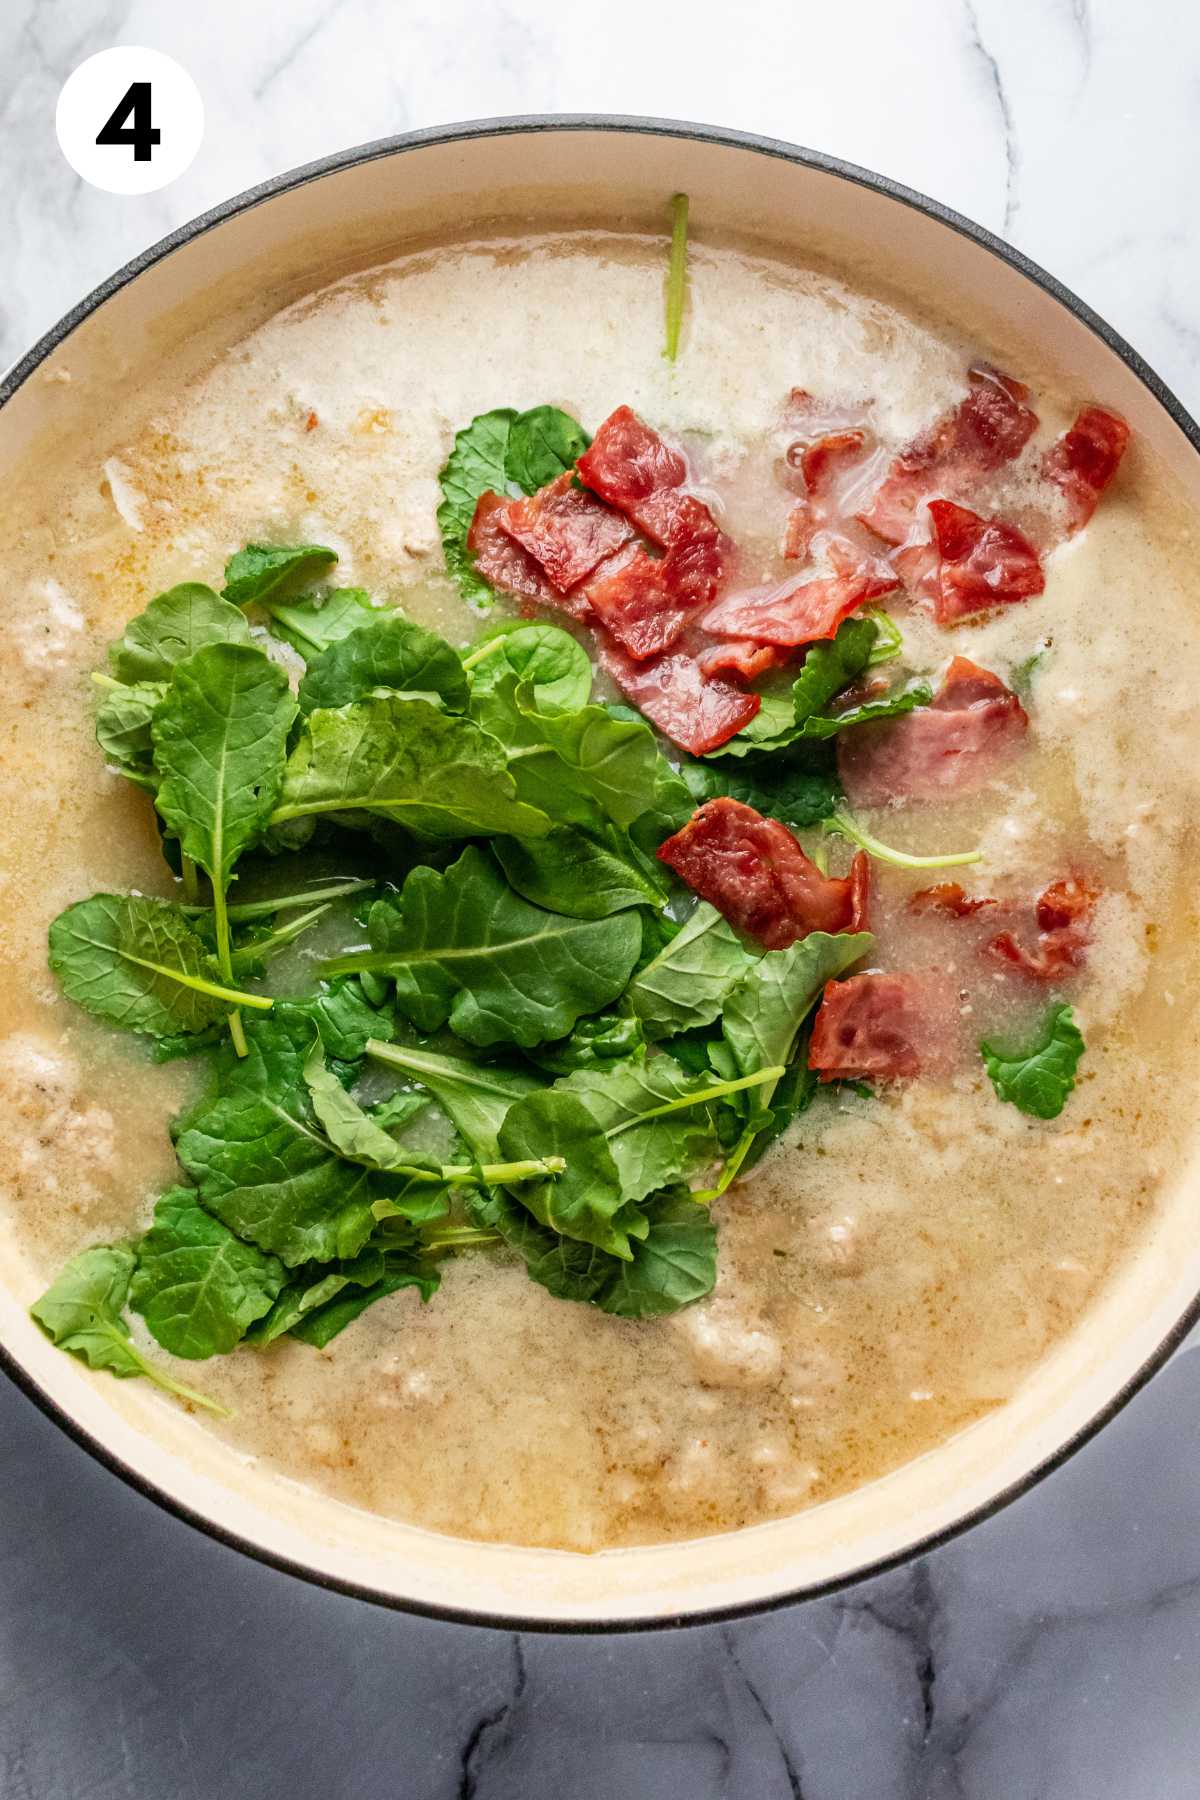 Spinach and cooked bacon added to the pot of soup.